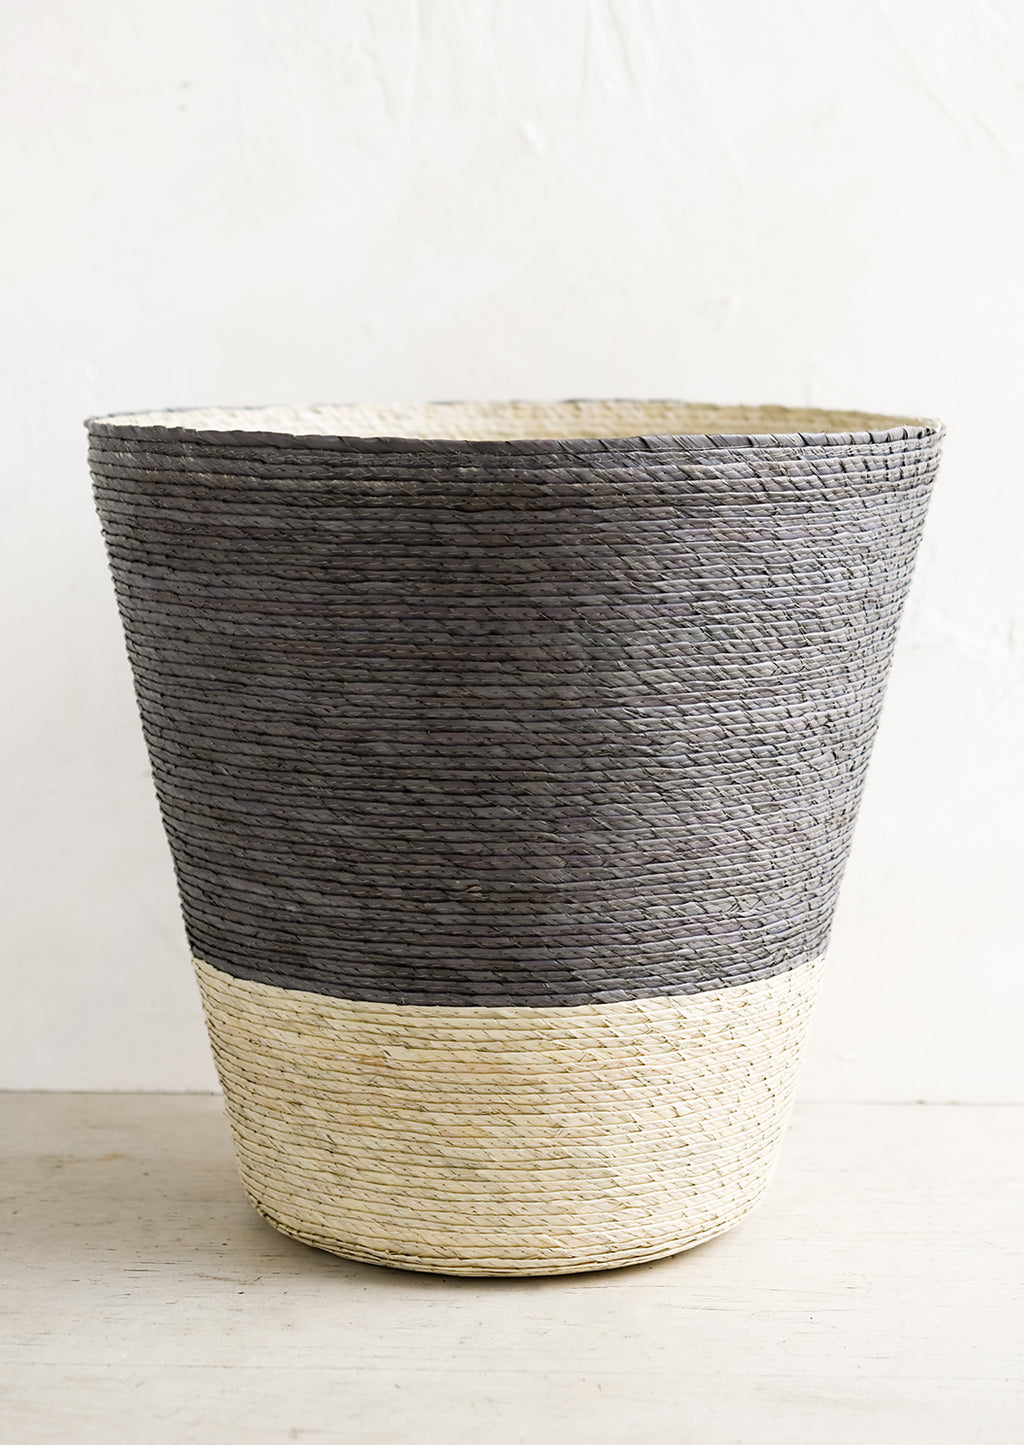 Mineral: A conical shaped storage basket made from woven palm leaf in mineral blue & natural color way.